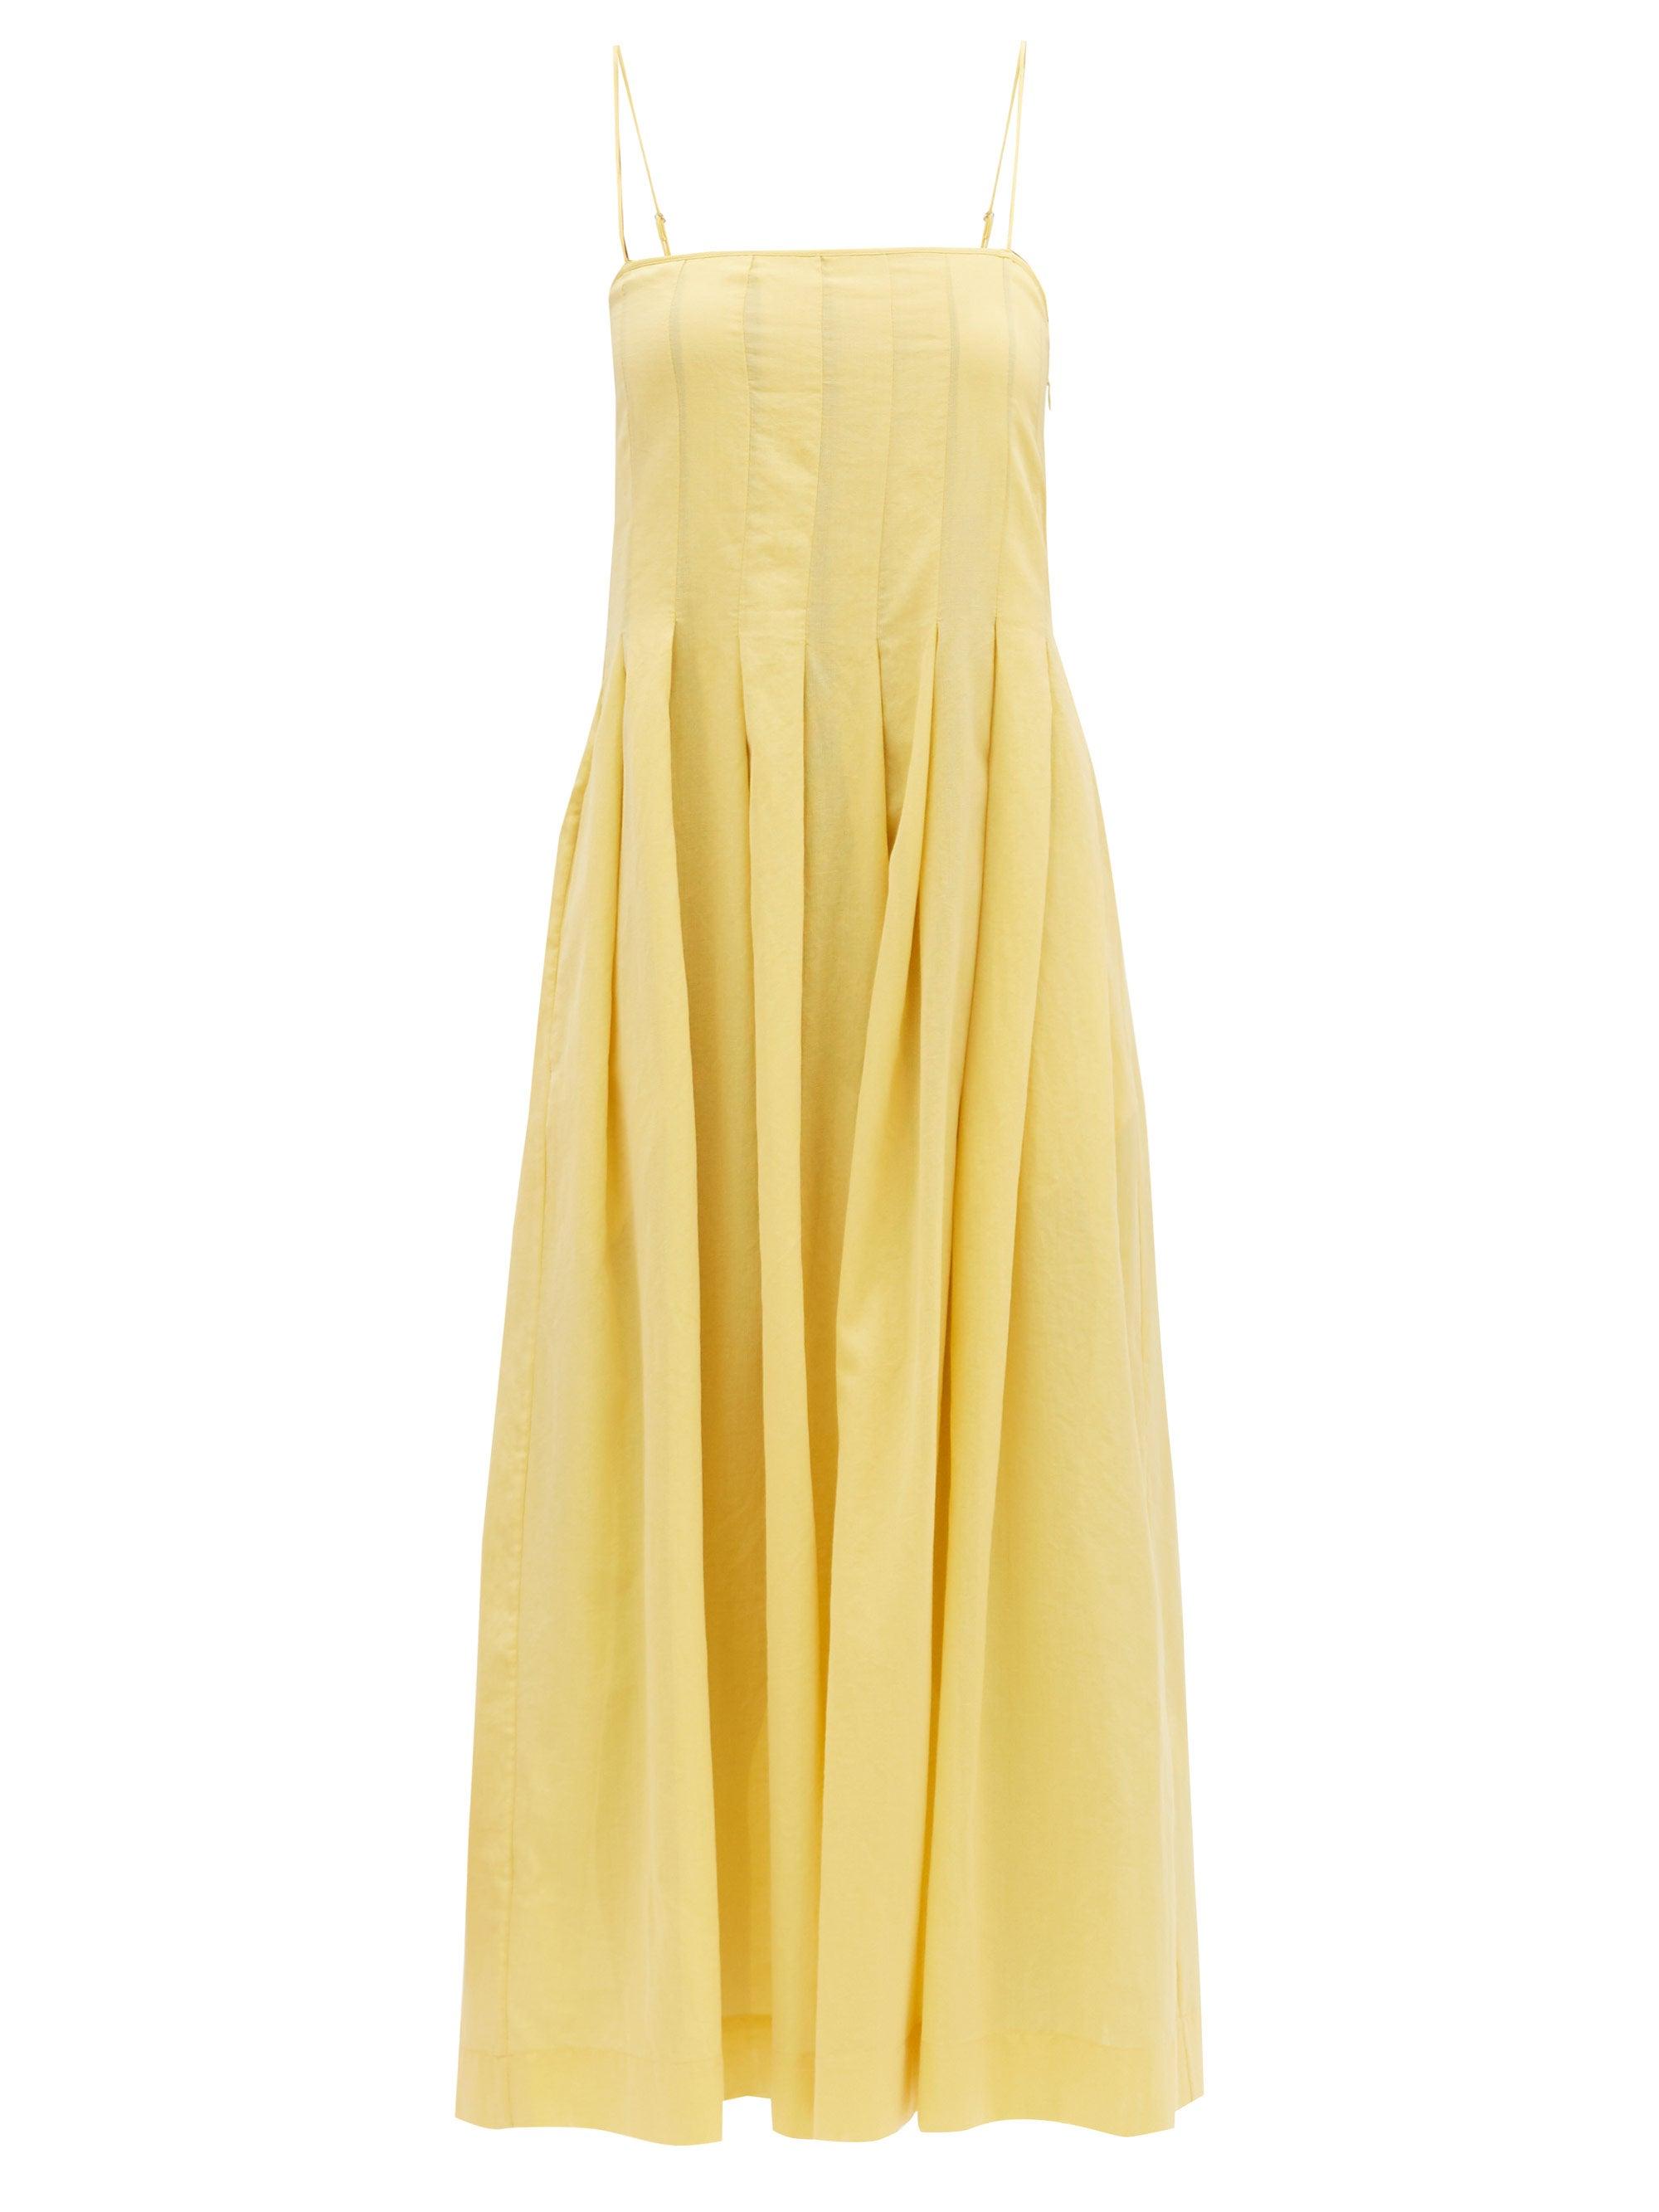 Three Graces London Lucia Pleated Cotton-gauze Maxi Dress in Yellow - Lyst